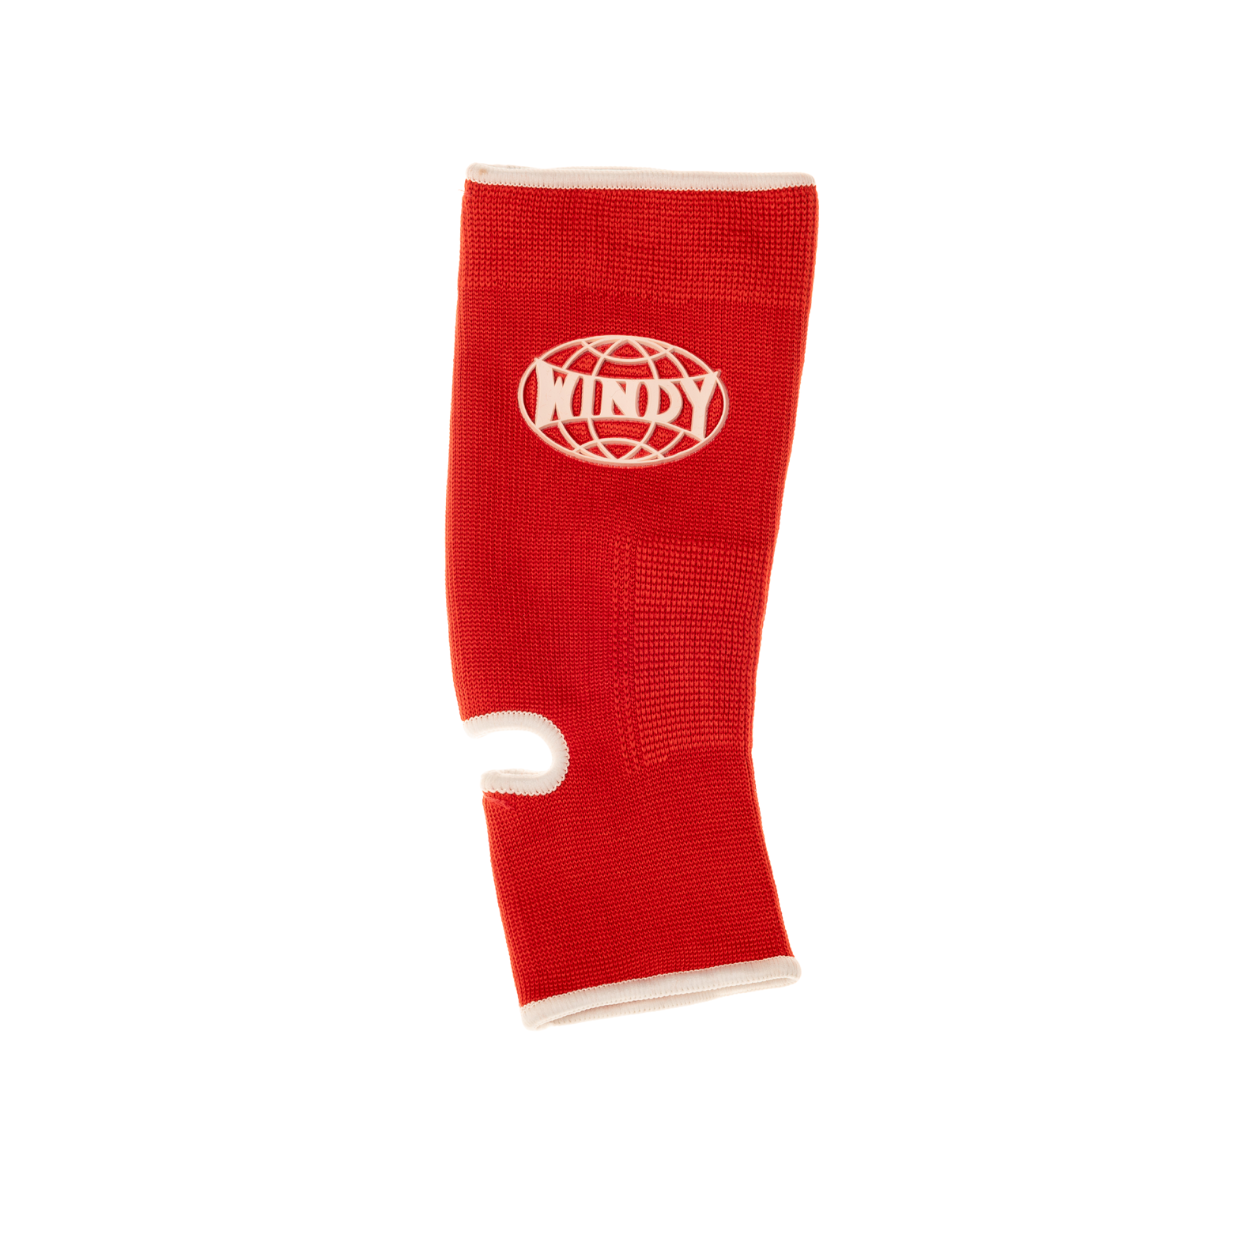 Ankle Guards - Red - Windy Fight Gear B.V.